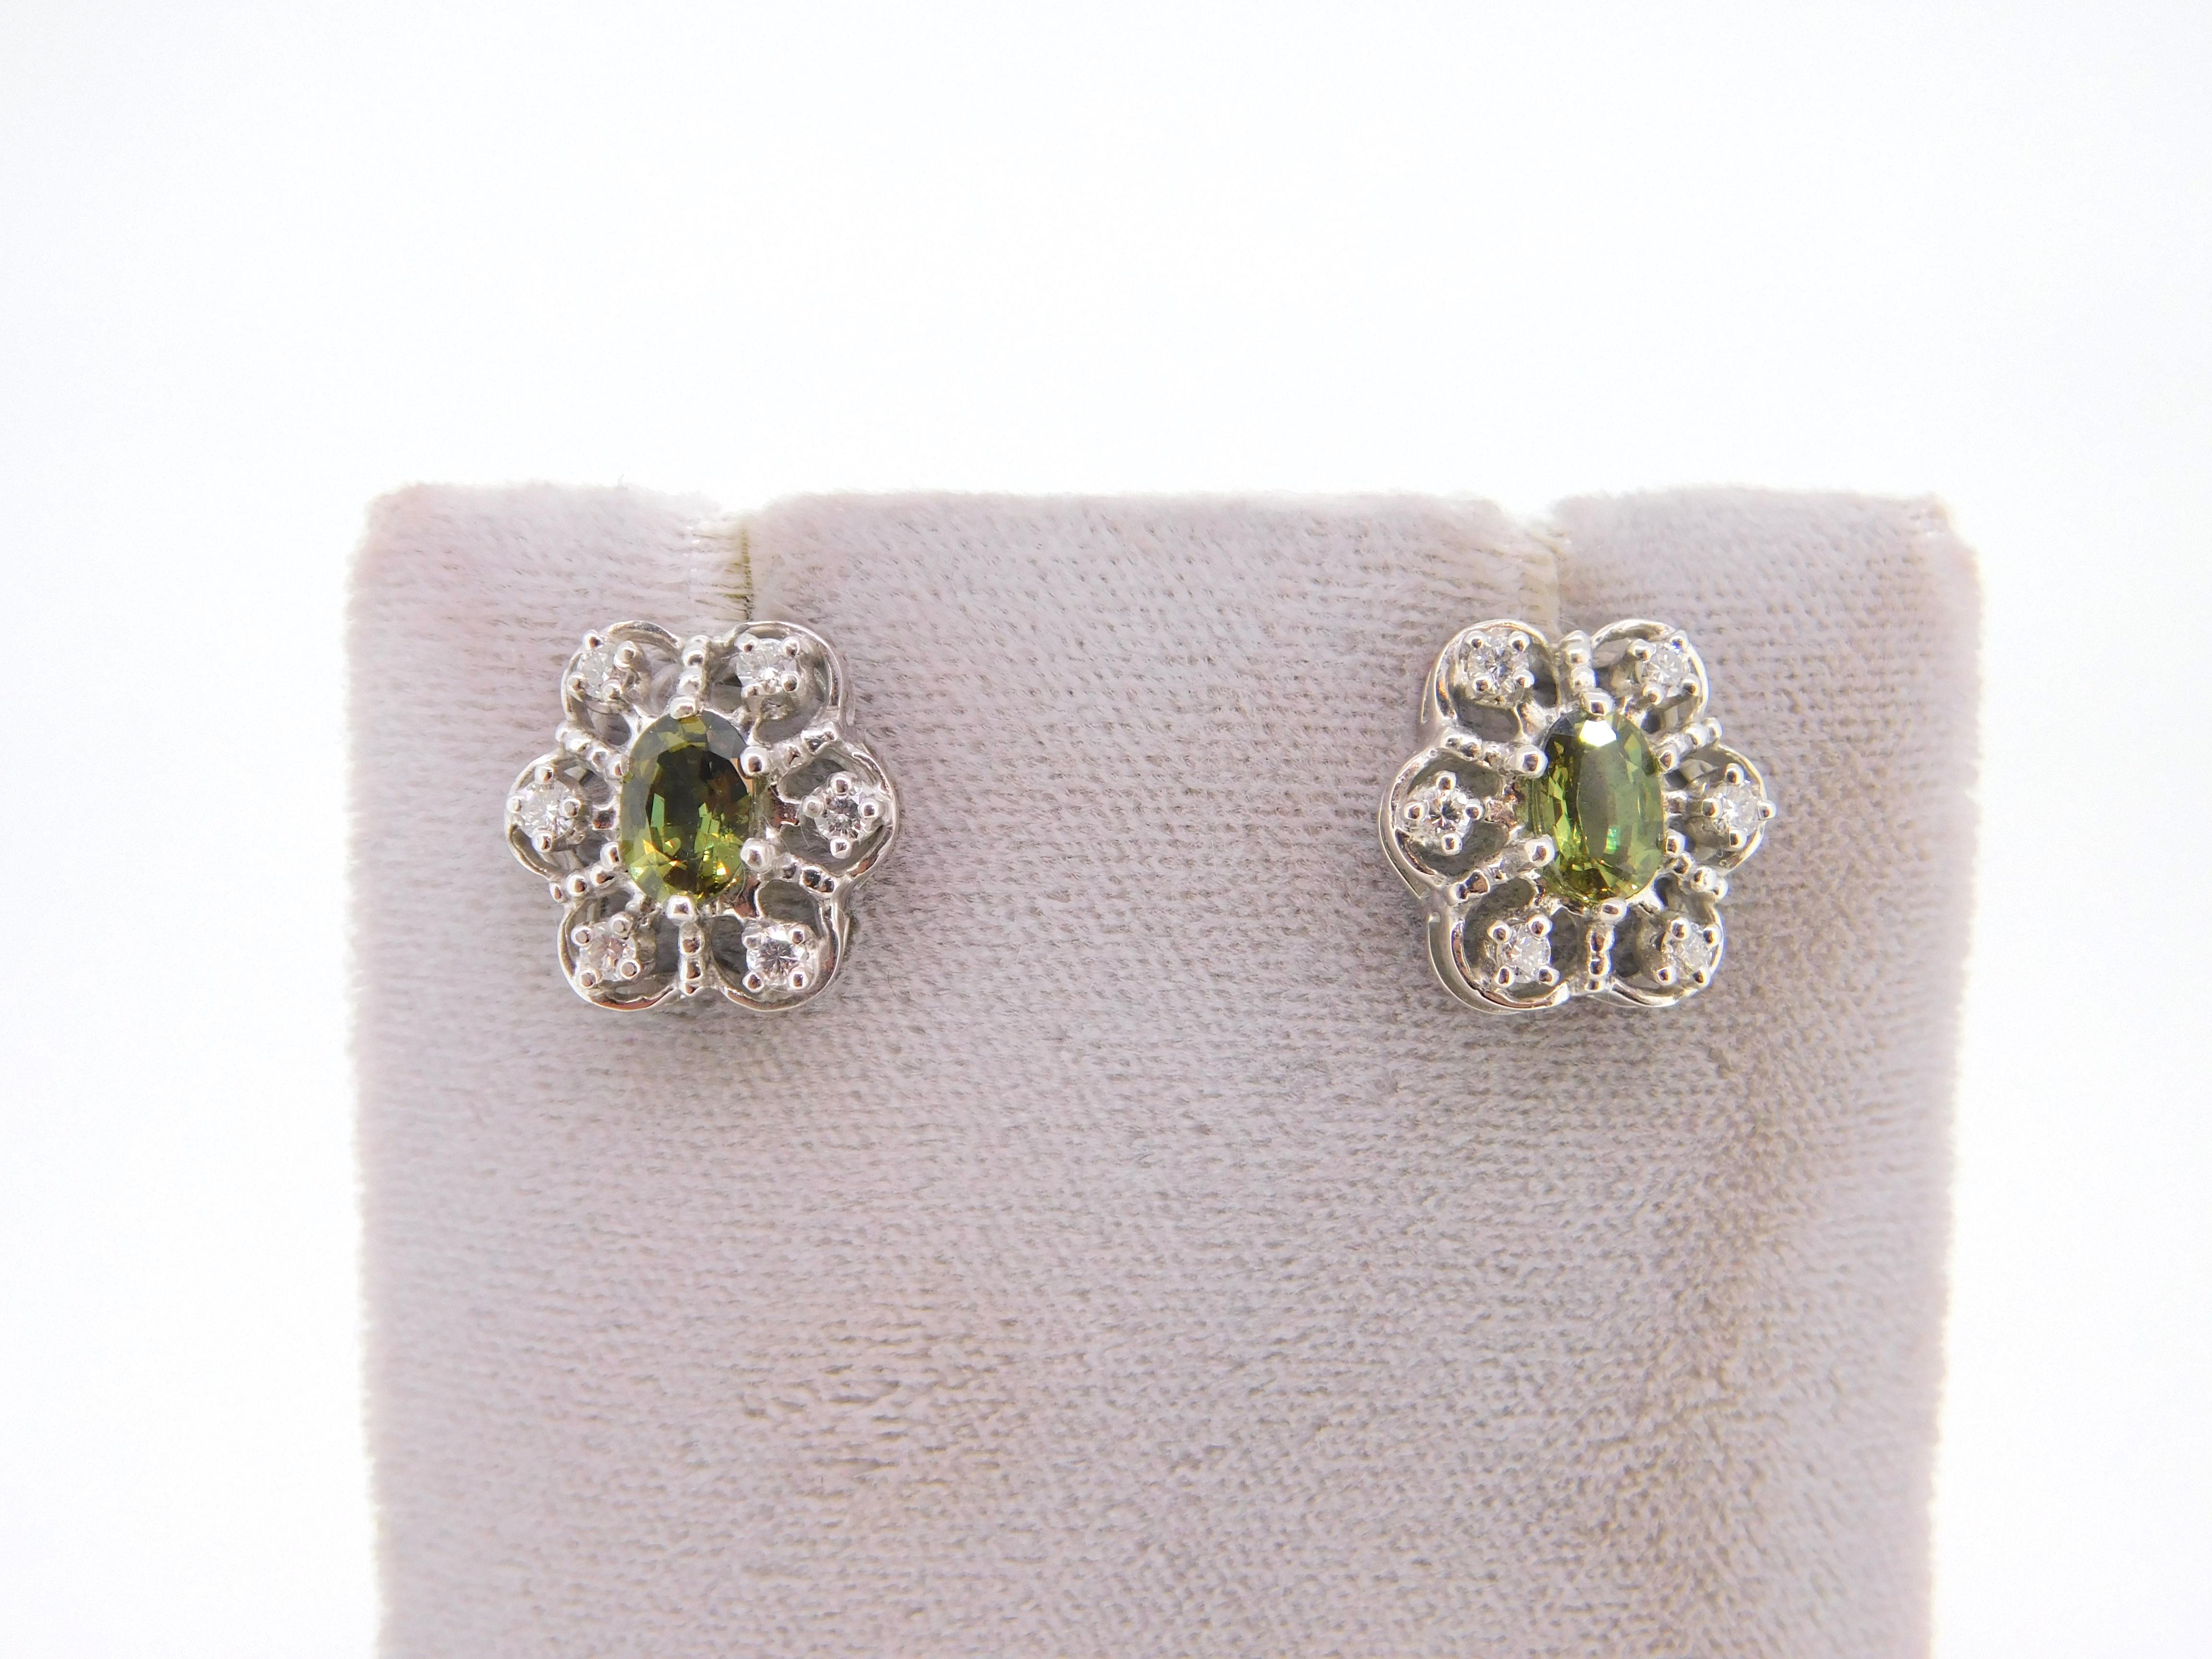 14K white gold natural alexandrite and diamond earrings. The oval natural alexandrites weigh 1.60 carats total and measure approximately 7mm x 5mm. The stones have a color change from purplish-brown to yellowish-green. There are 12 small round